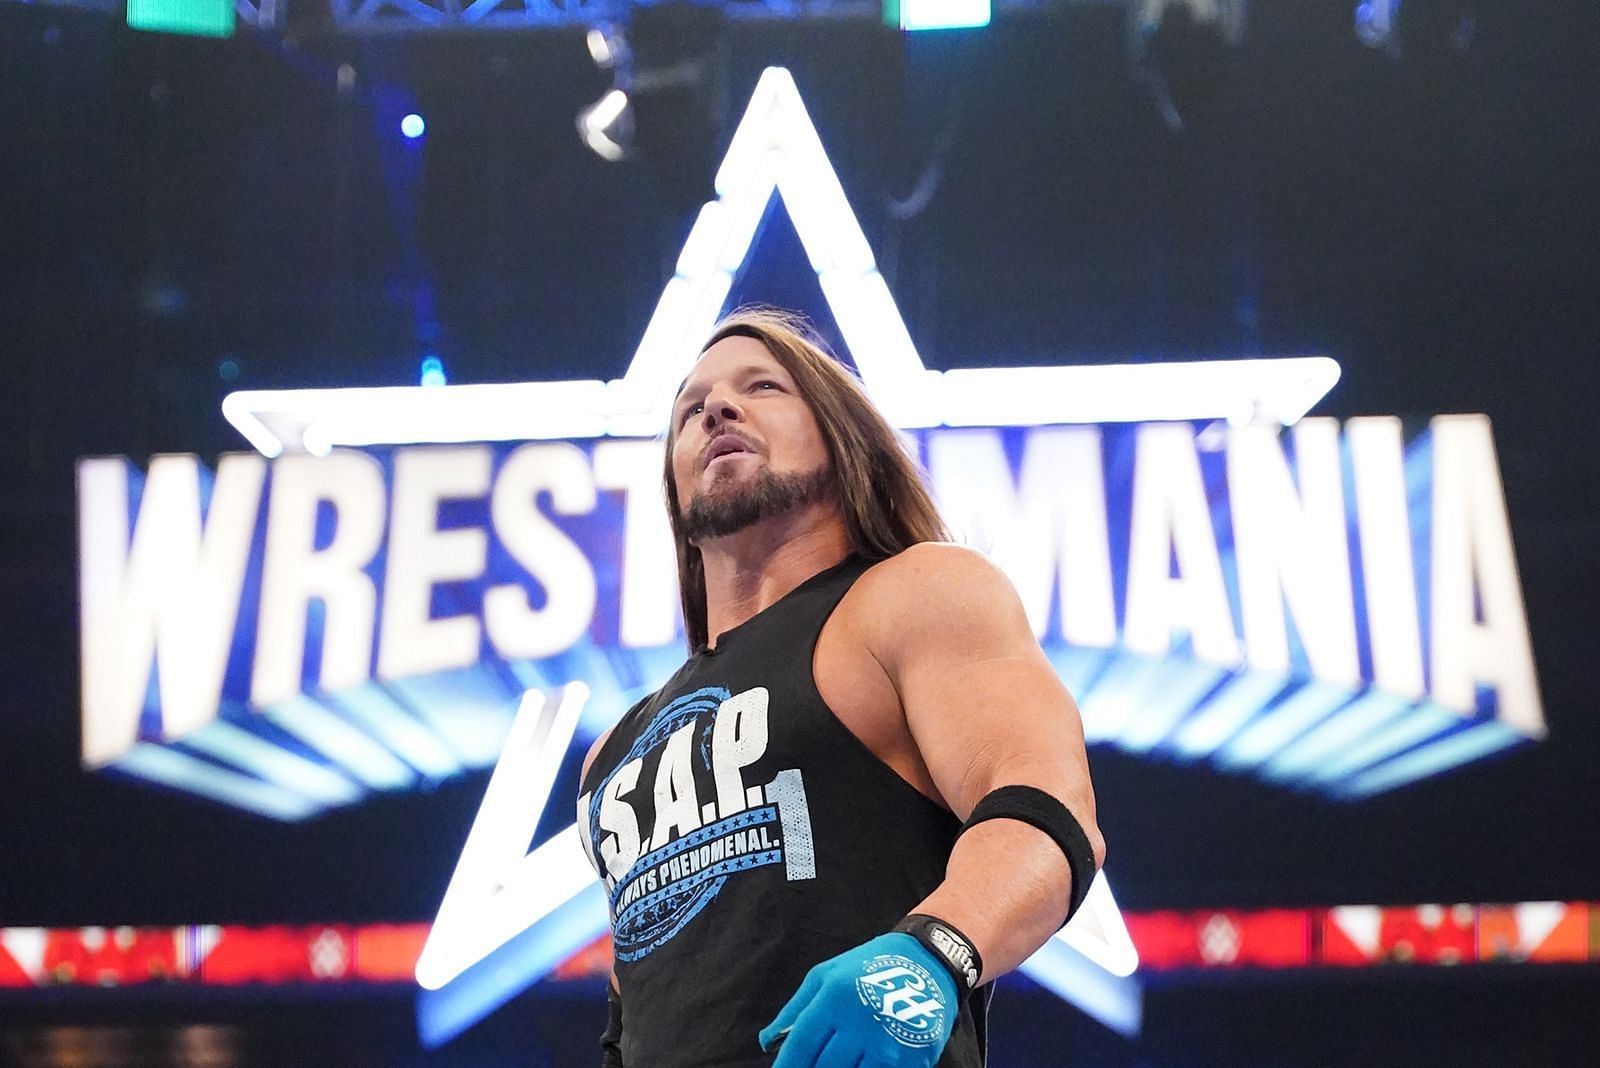 AJ Styles is one of the greatest of all time